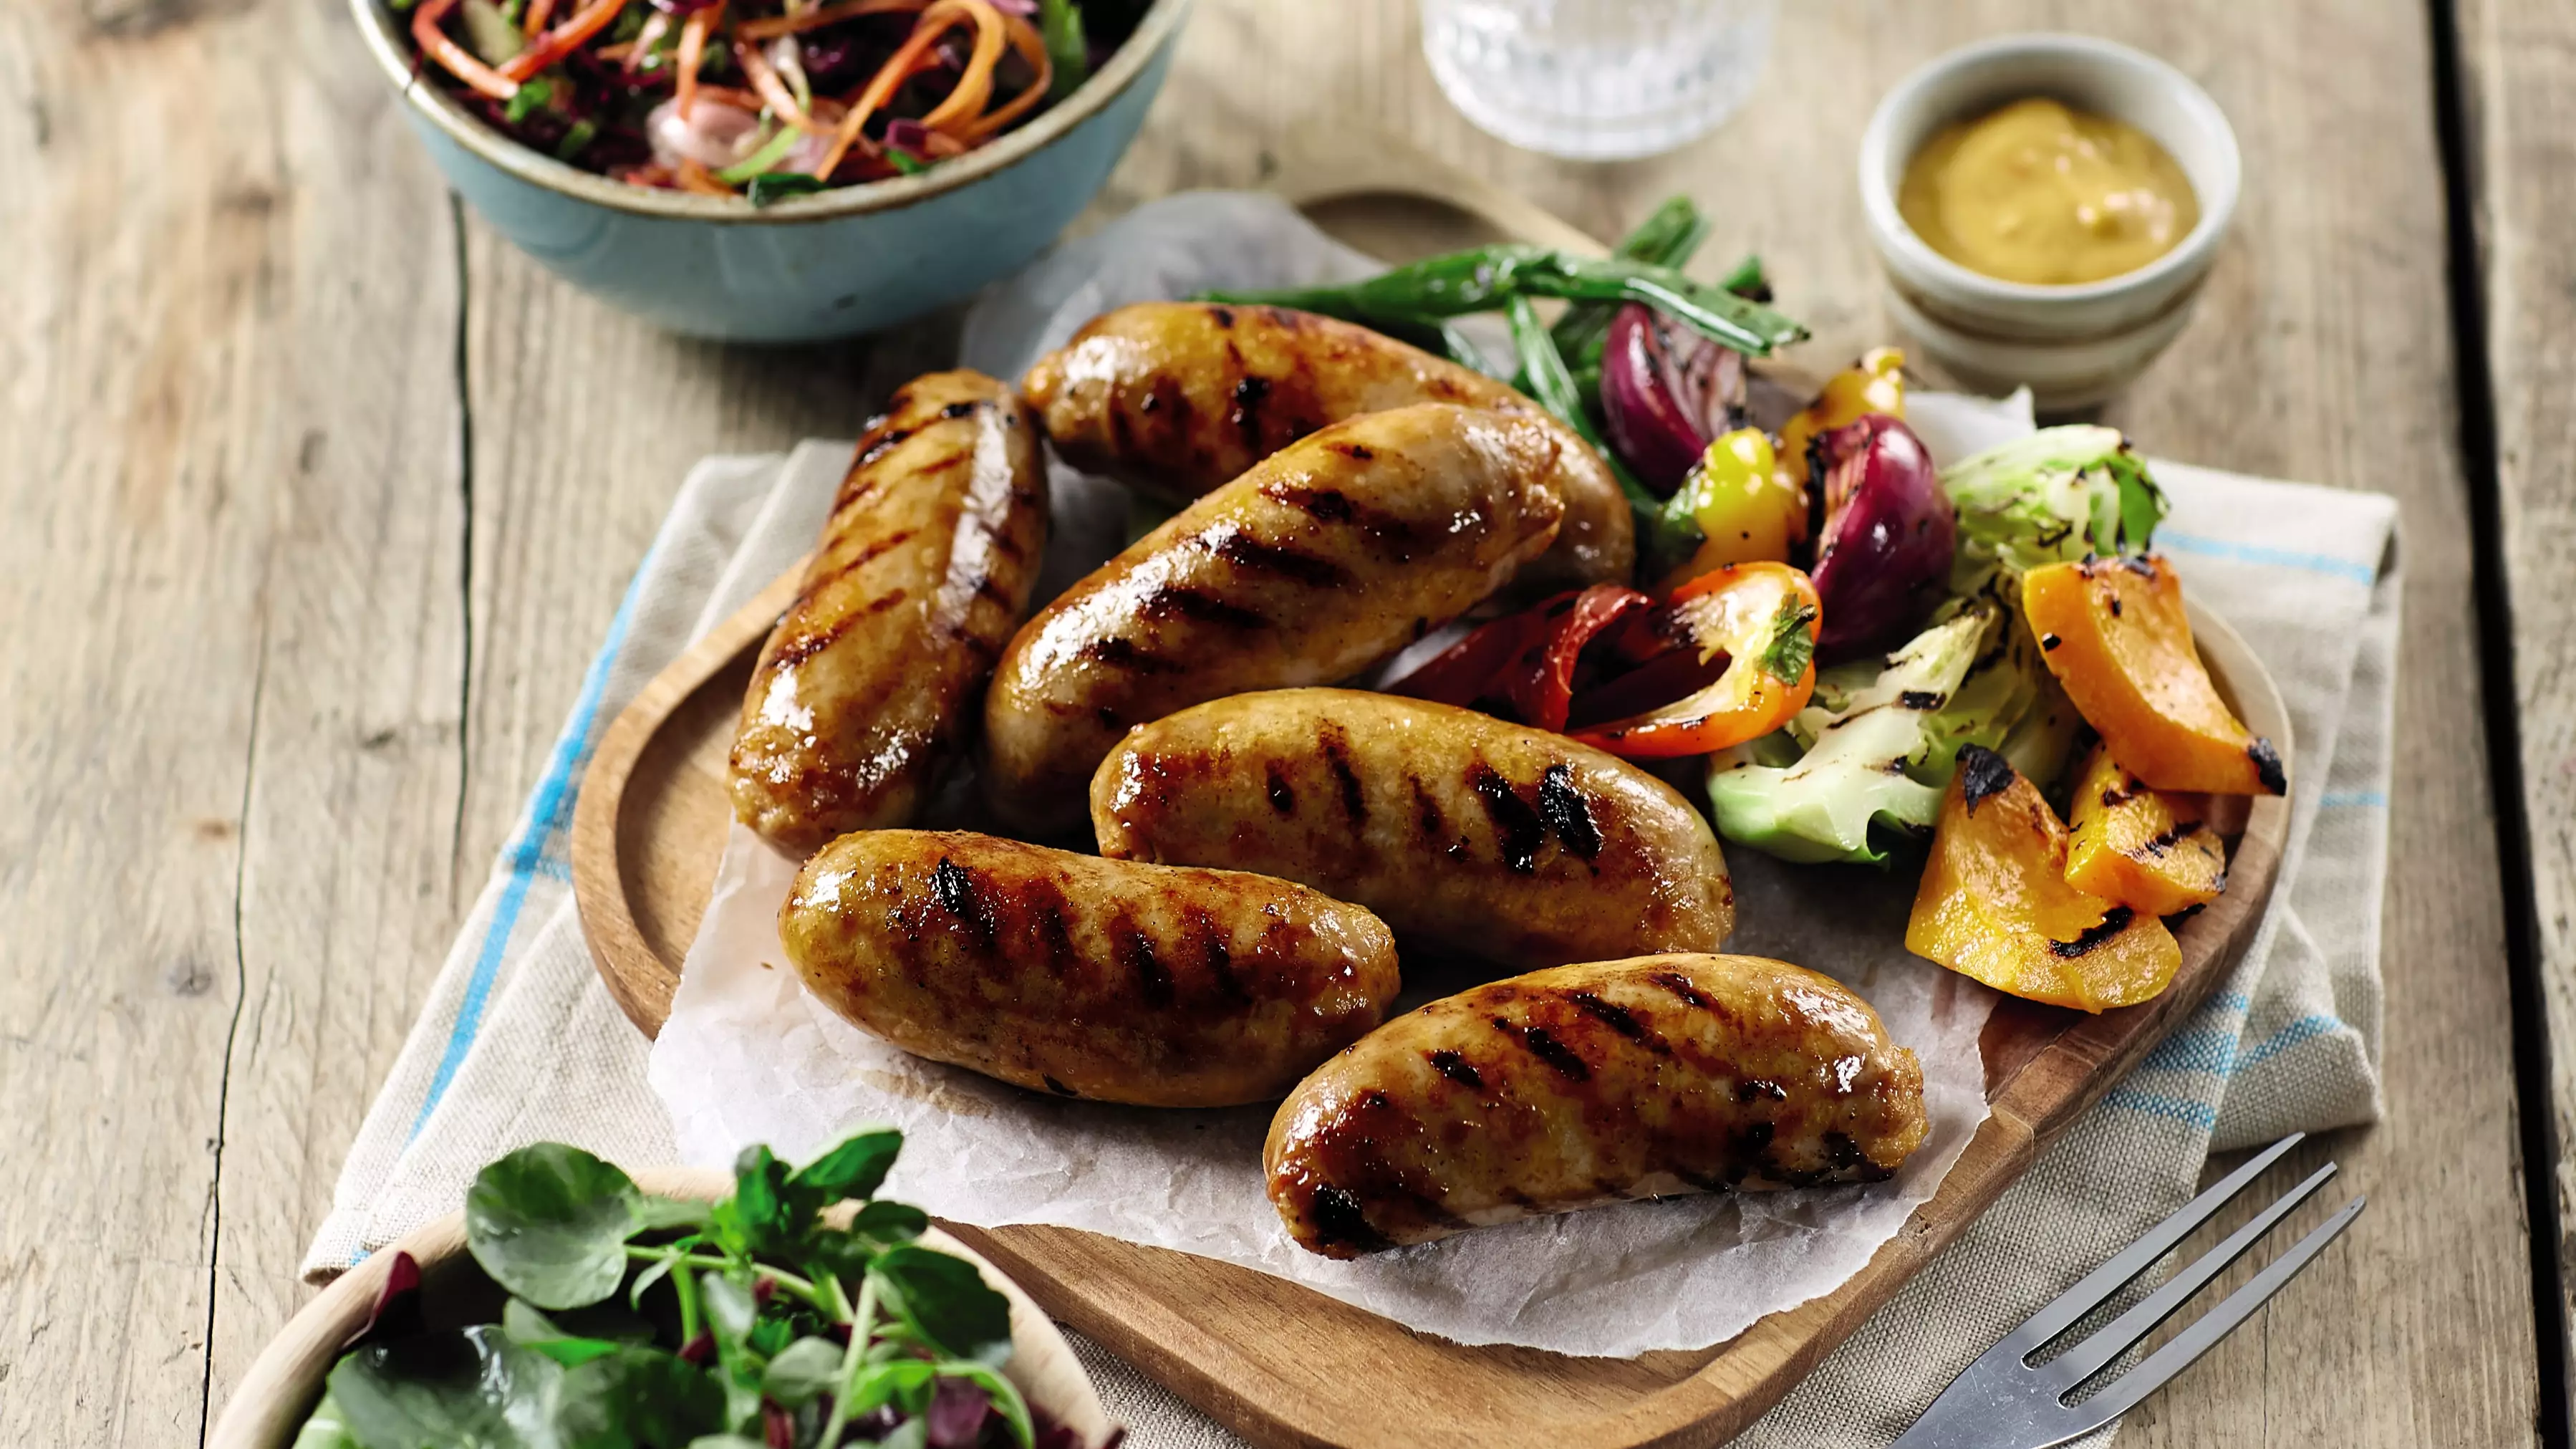 Aldi Is Launching Cheese-Filled Sausages So Don’t Pack Away Your Barbecue Just Yet